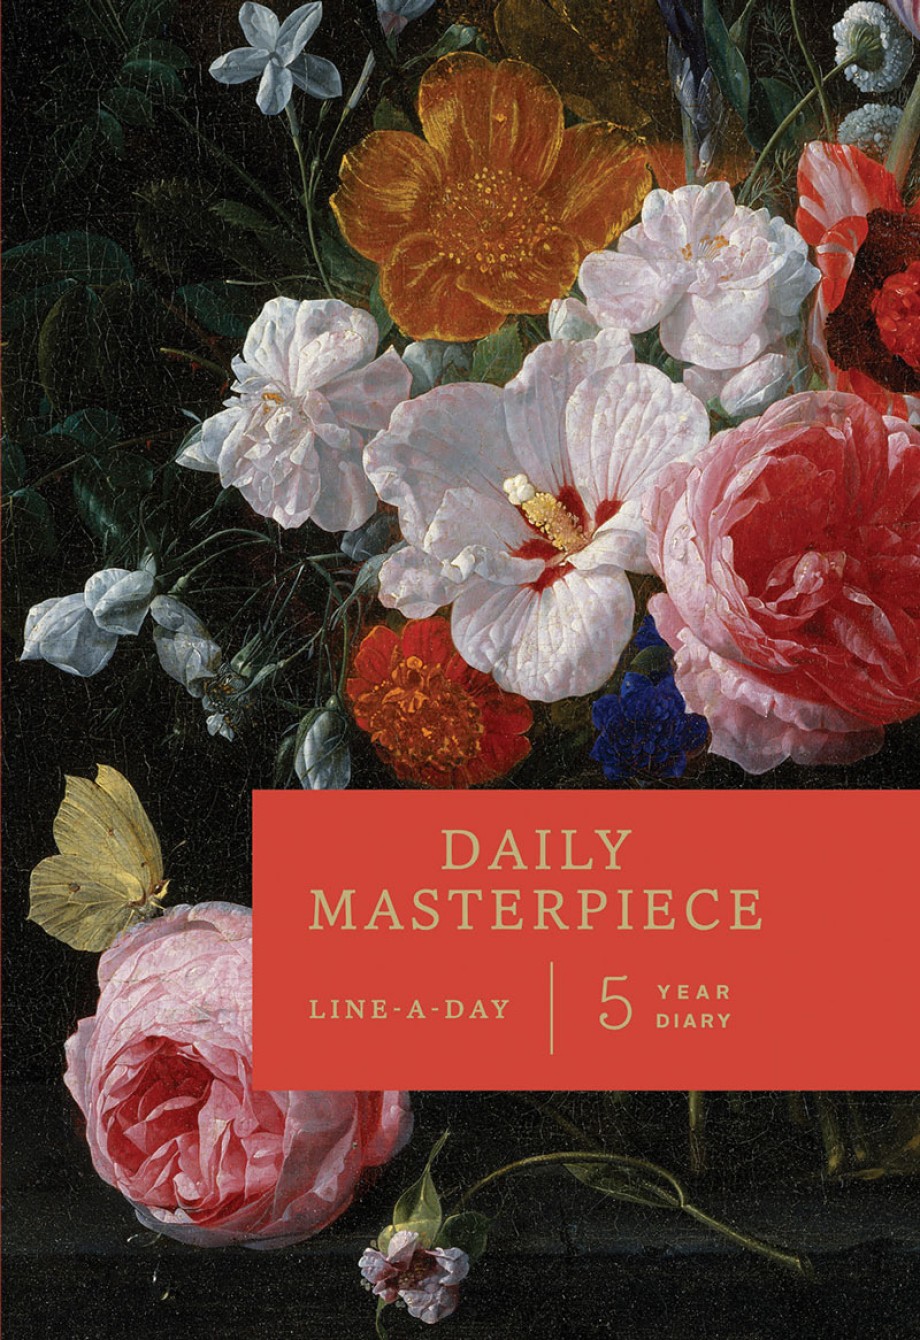 Daily Masterpiece Line-A-Day 5 Year Diary